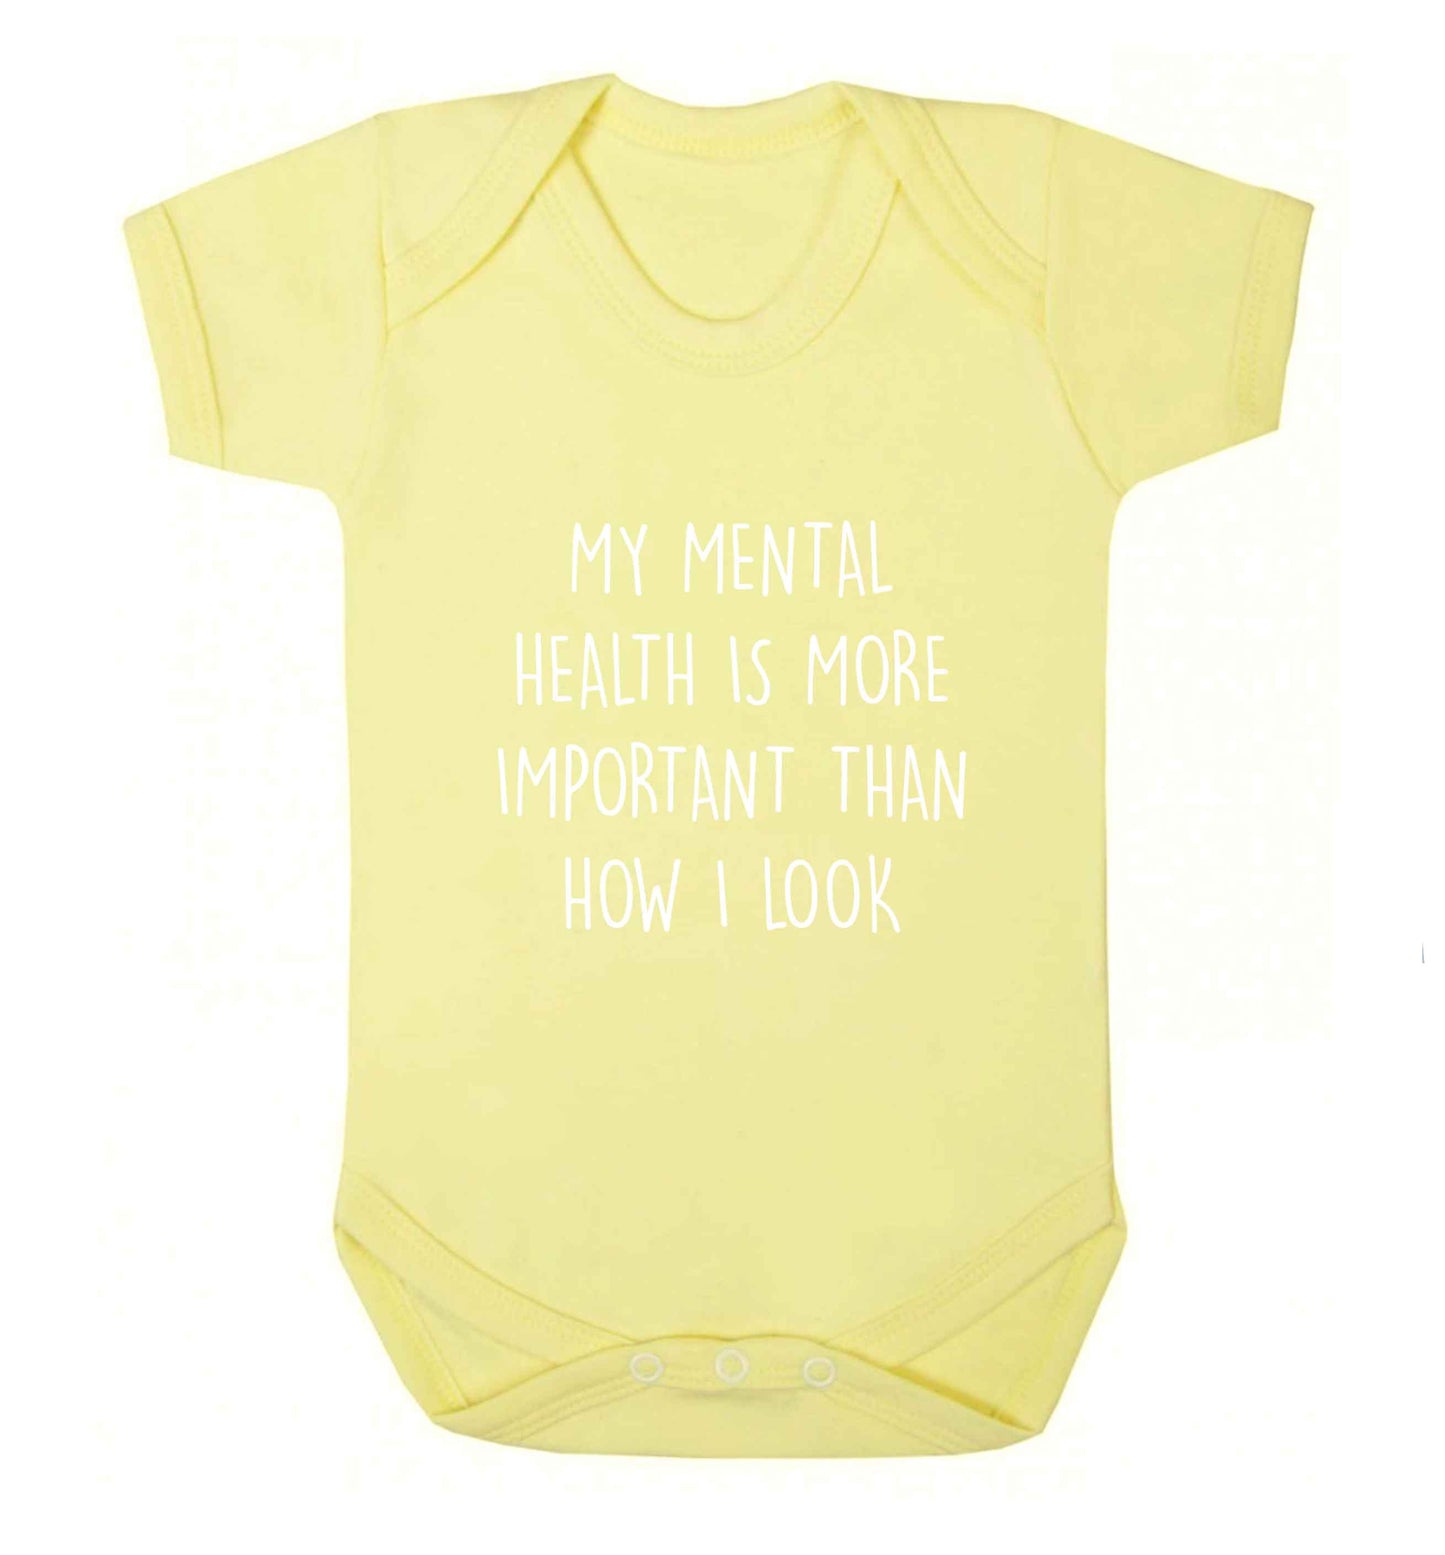 My mental health is more importnat than how I look baby vest pale yellow 18-24 months